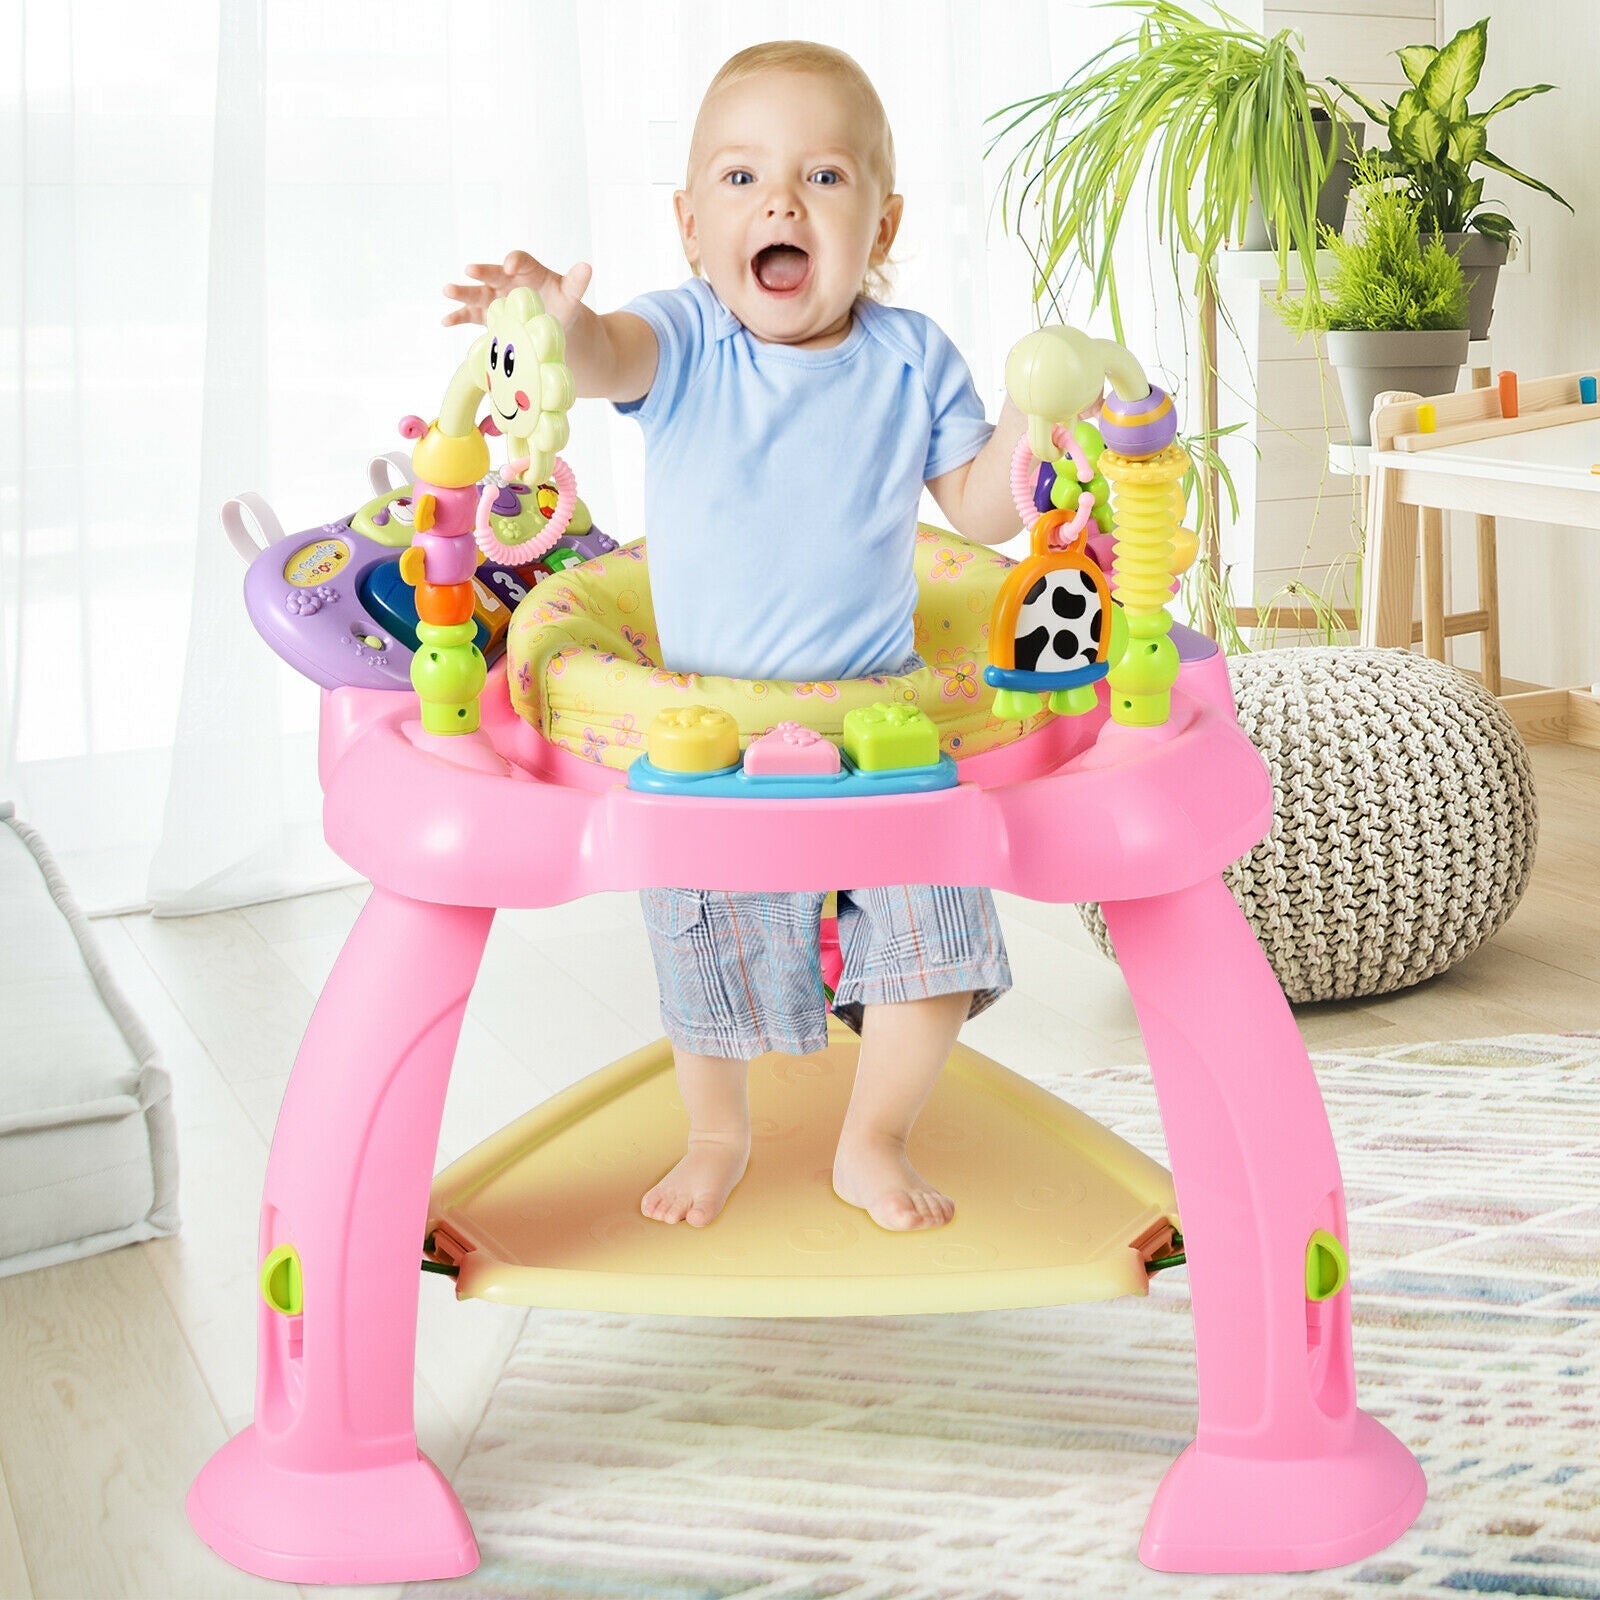 Infant Jumperoo with Adjustable Heights and Toys